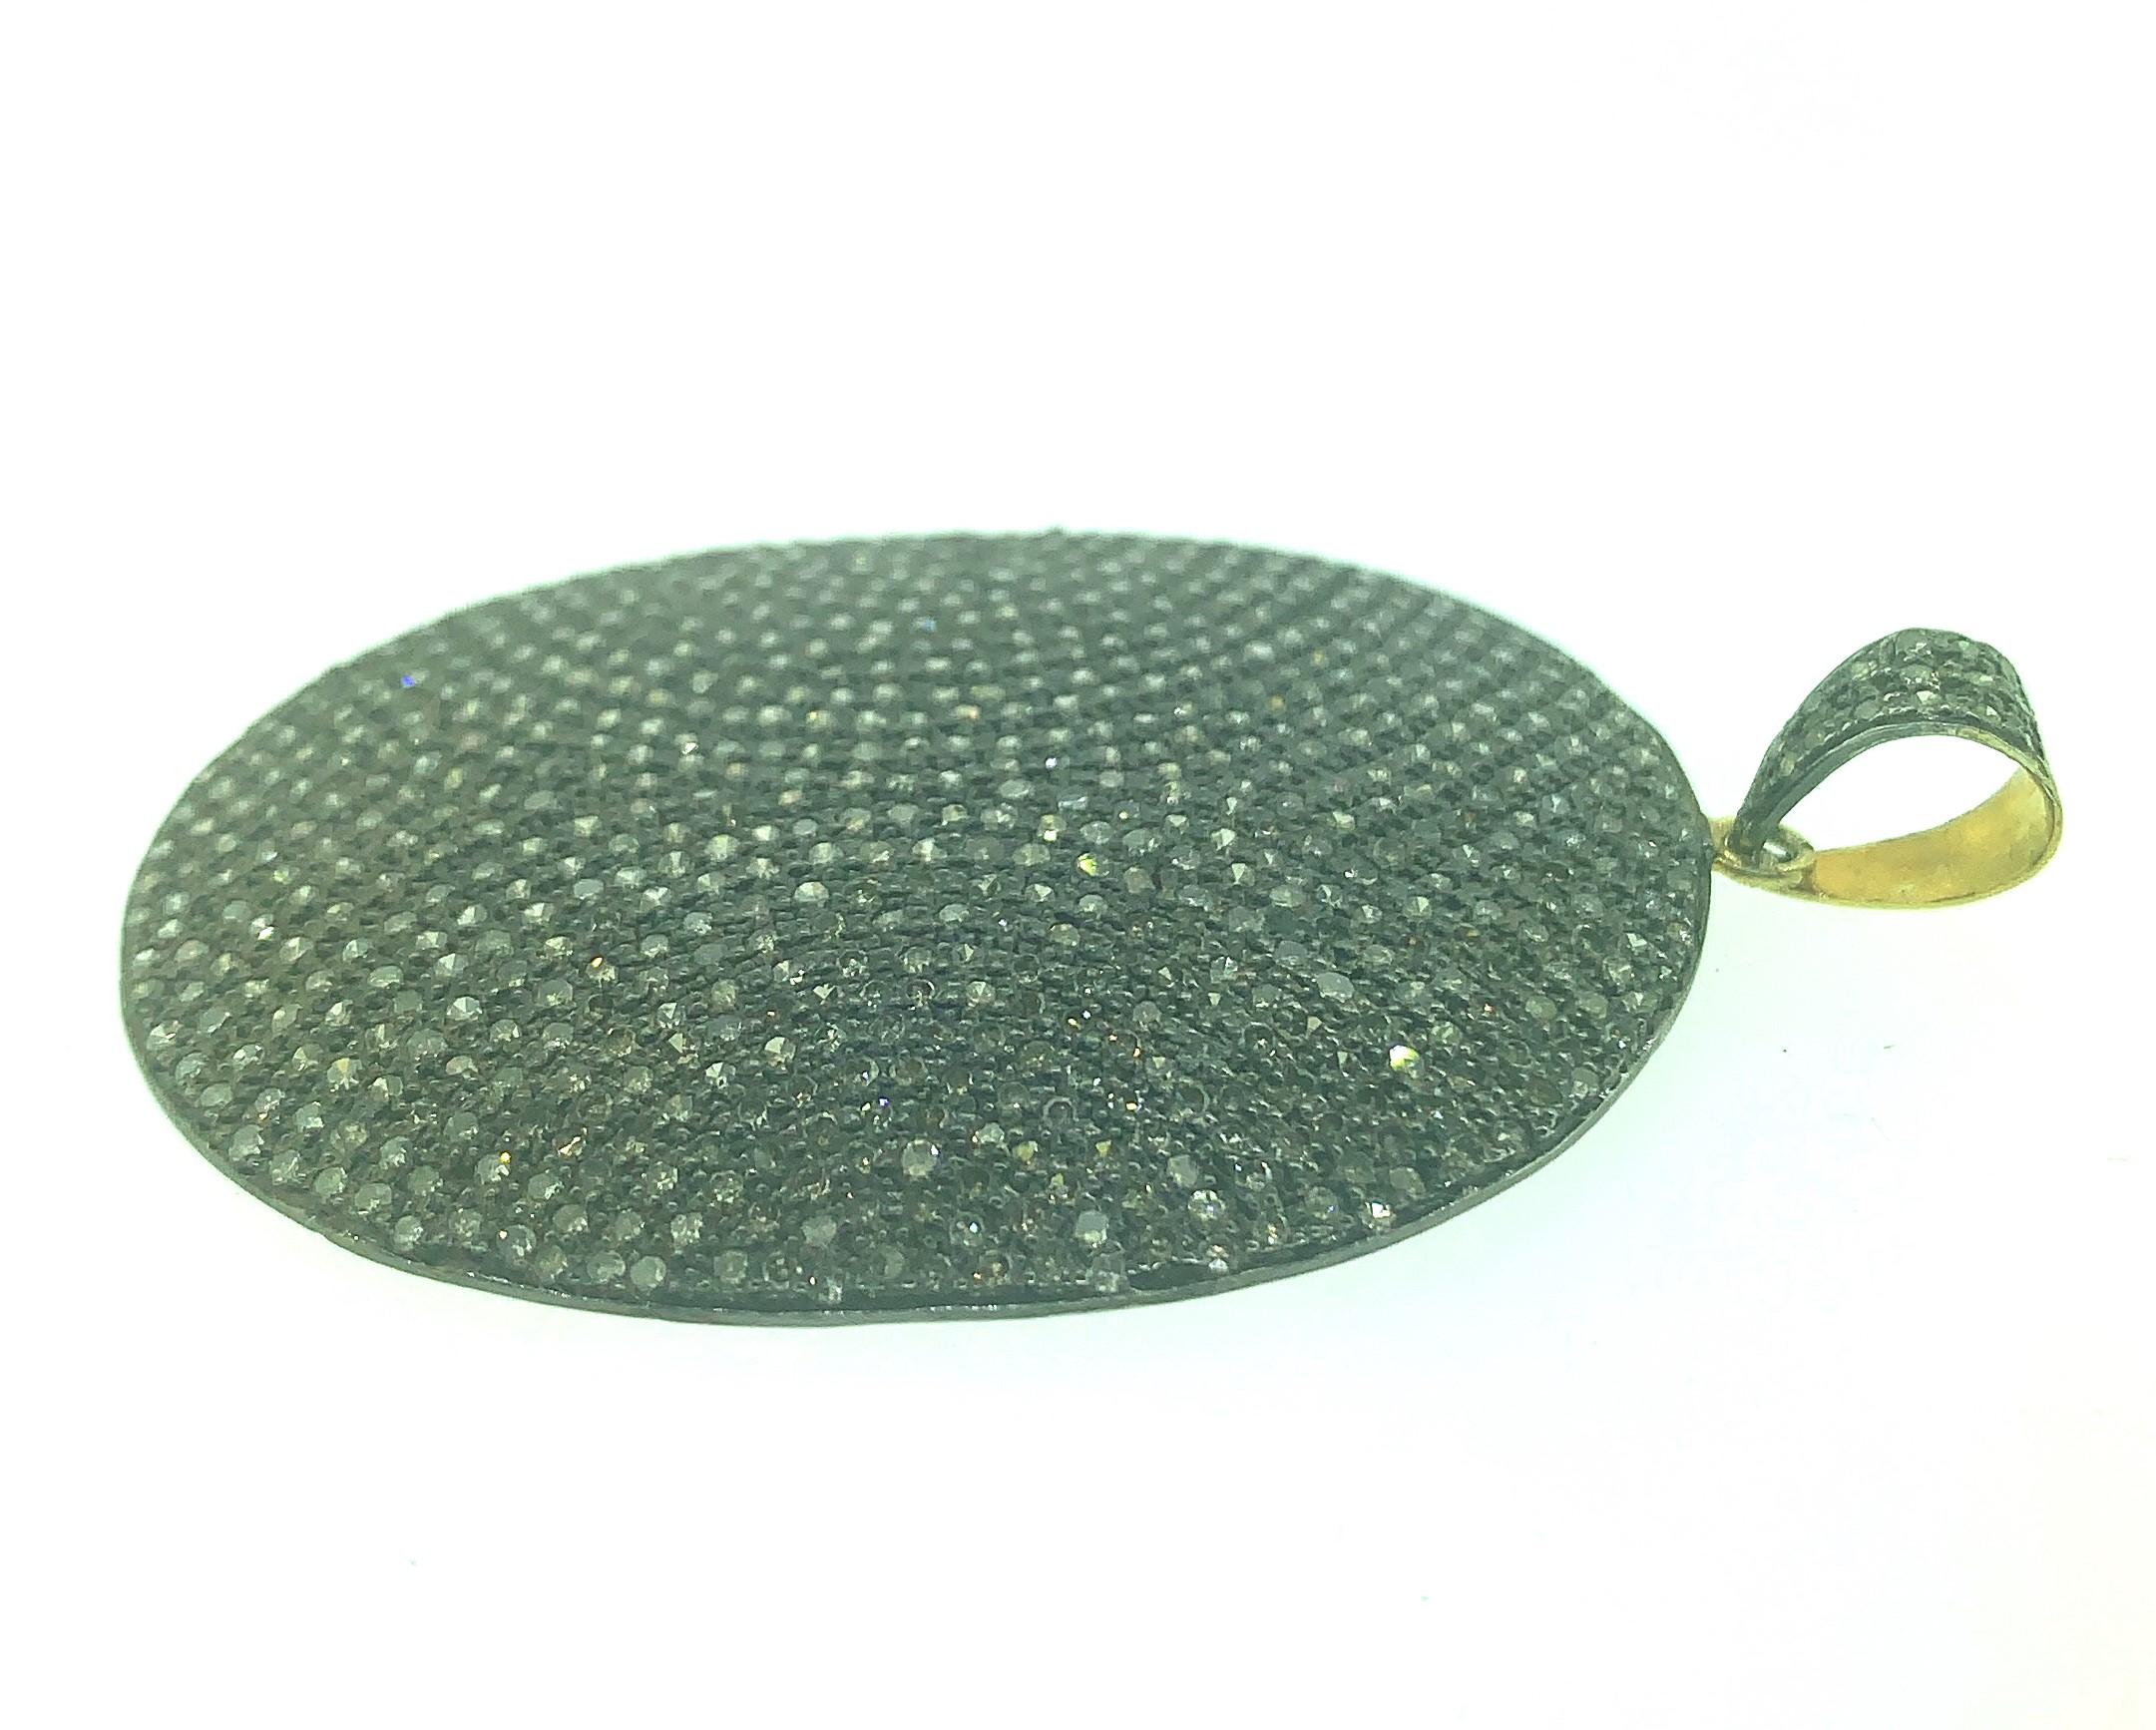 4.45 Carat Oval Pave Diamond Pendant in Oxidized Sterling Silver, 14 Karat Gold In New Condition For Sale In New York, NY